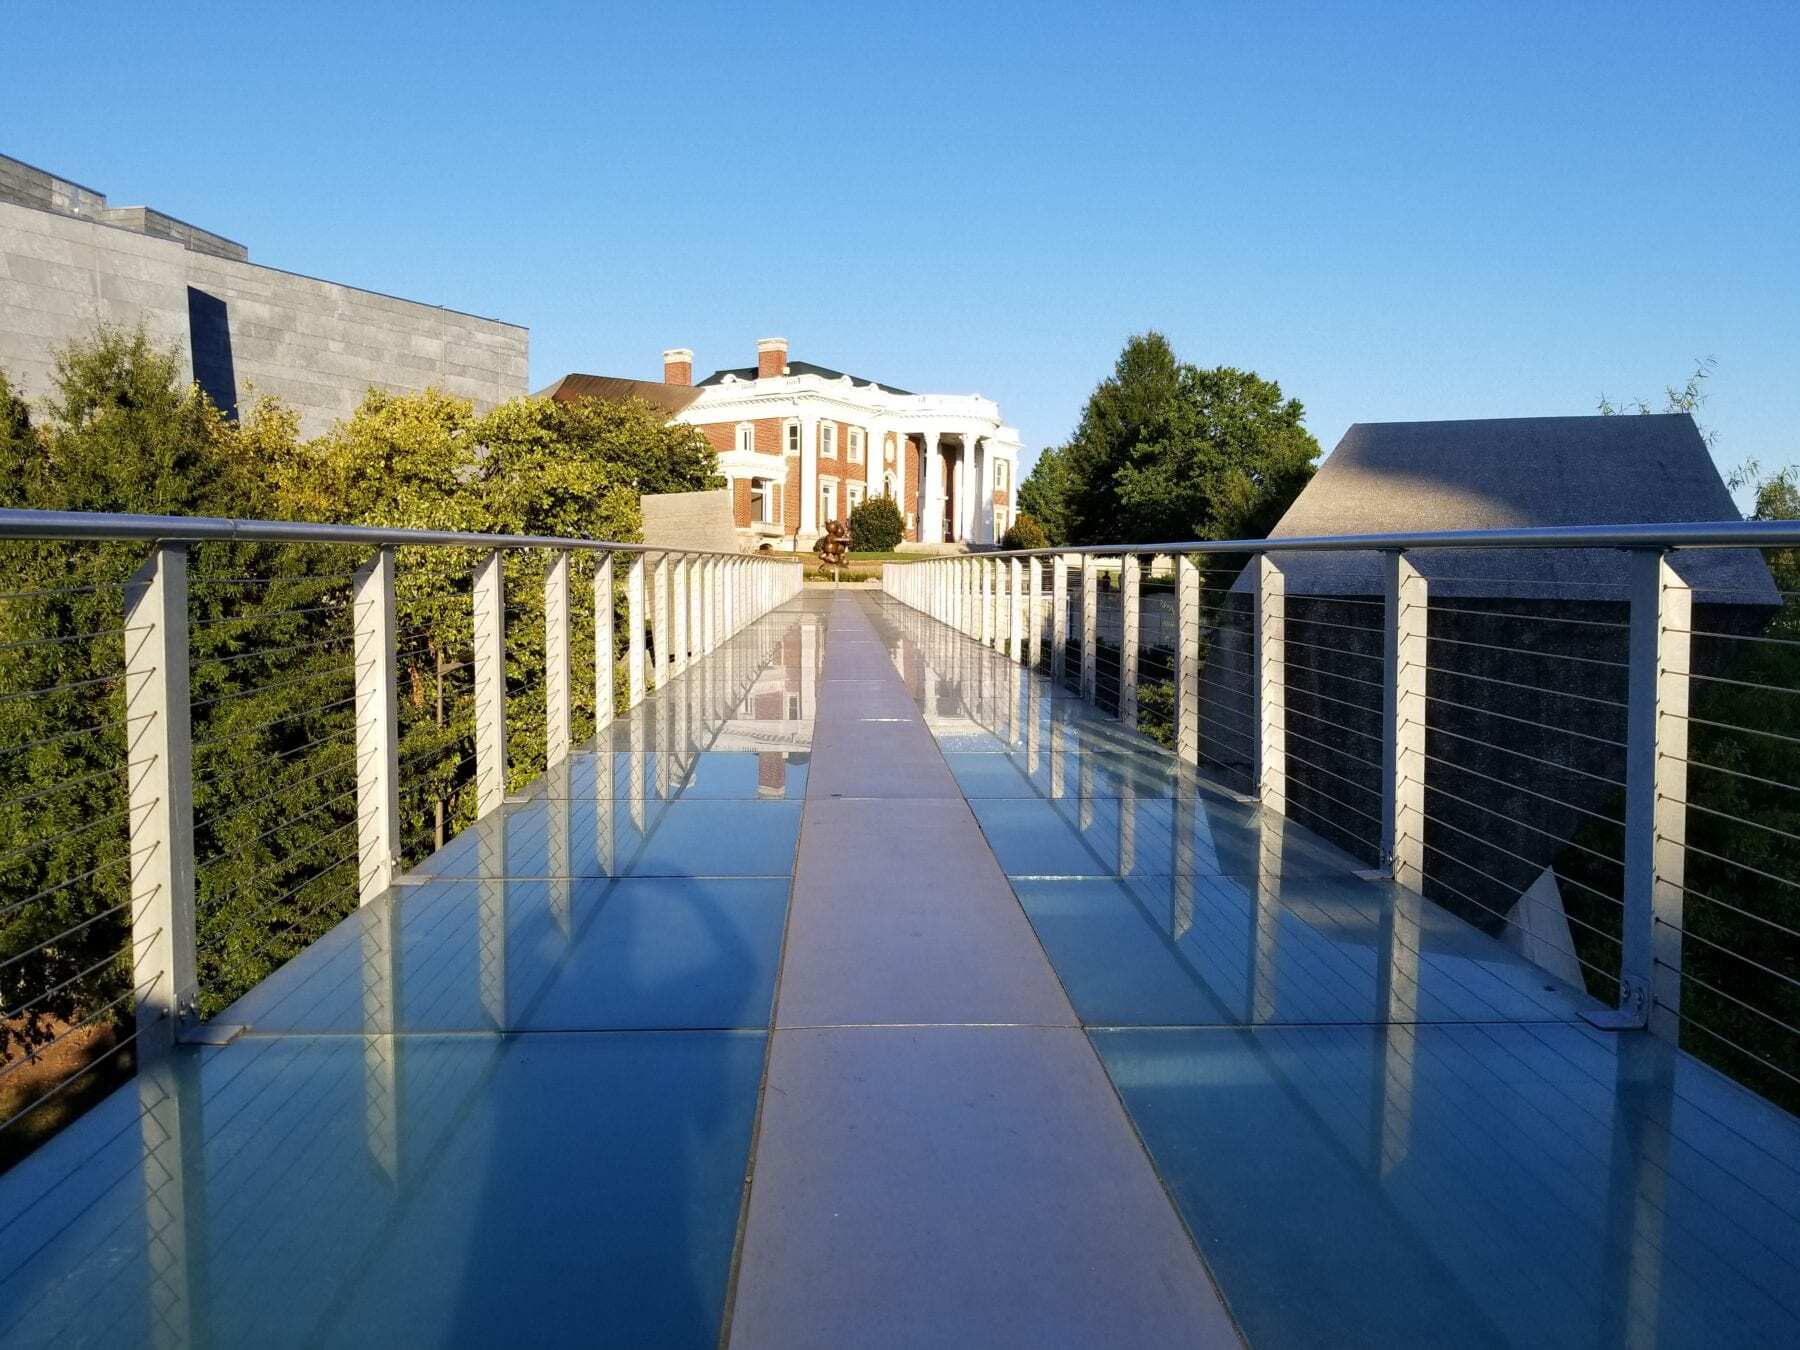 Chattanooga, TN: Glass and steel walking bridge leading to a mansion